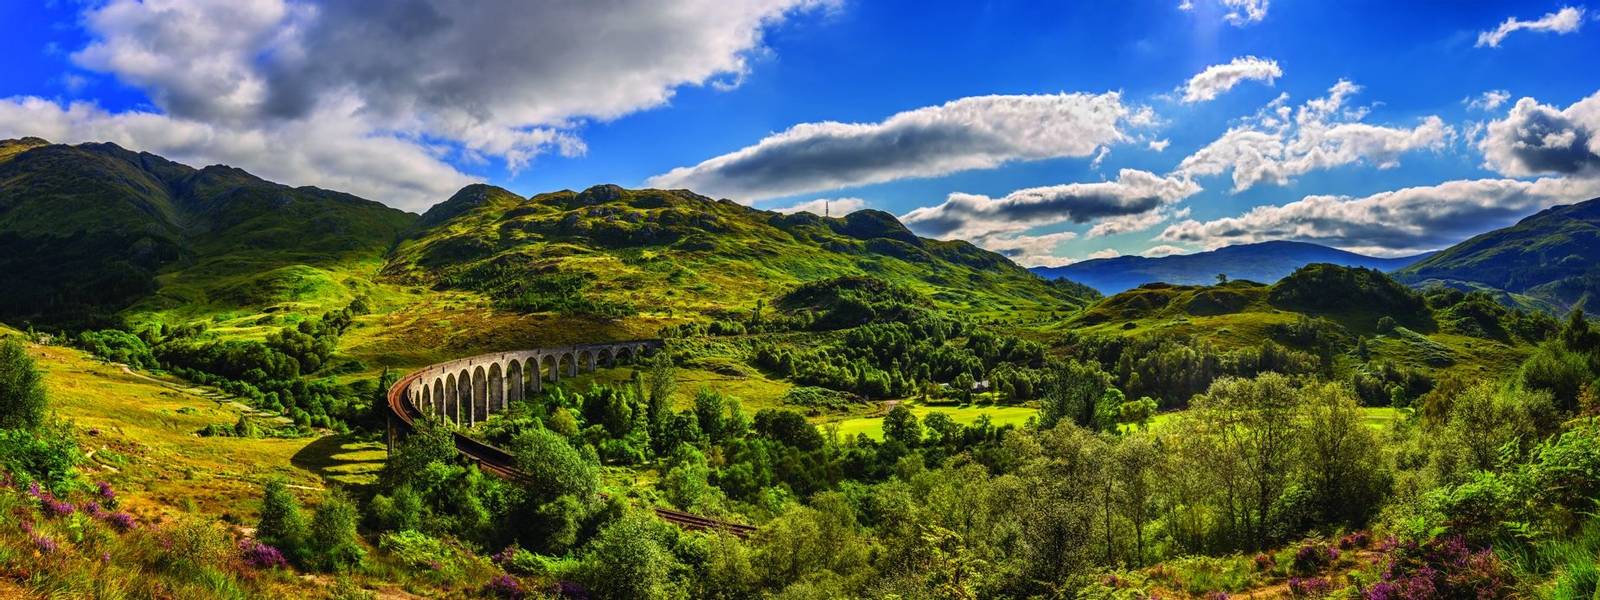 Panorama of Glenfinnan Railway Viaduct in Scotland and surrounding mountains